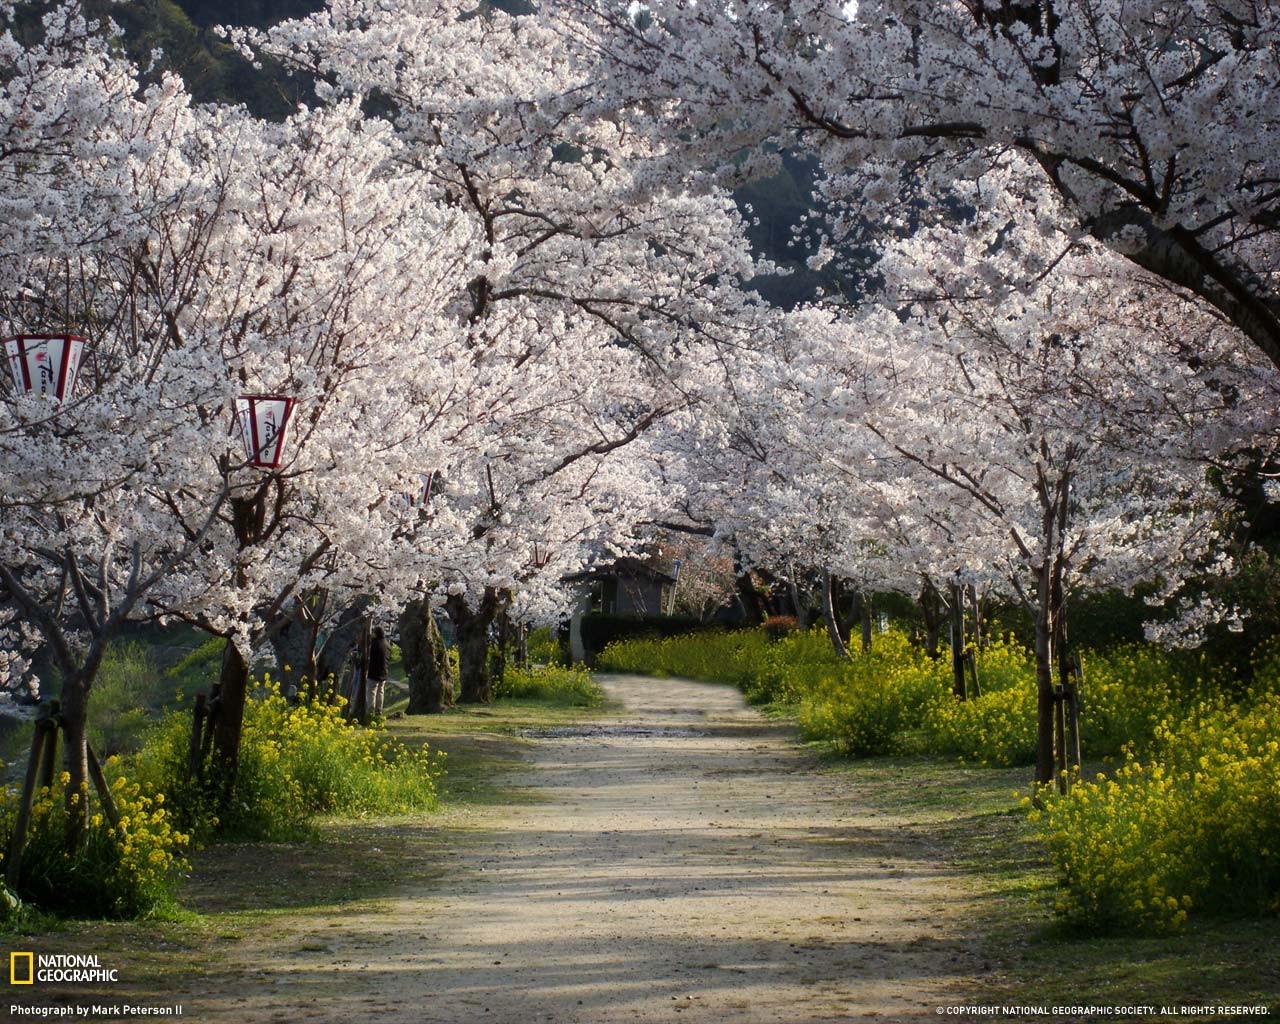 General 1280x1024 National Geographic trees nature cherry blossom Japan path dirt road